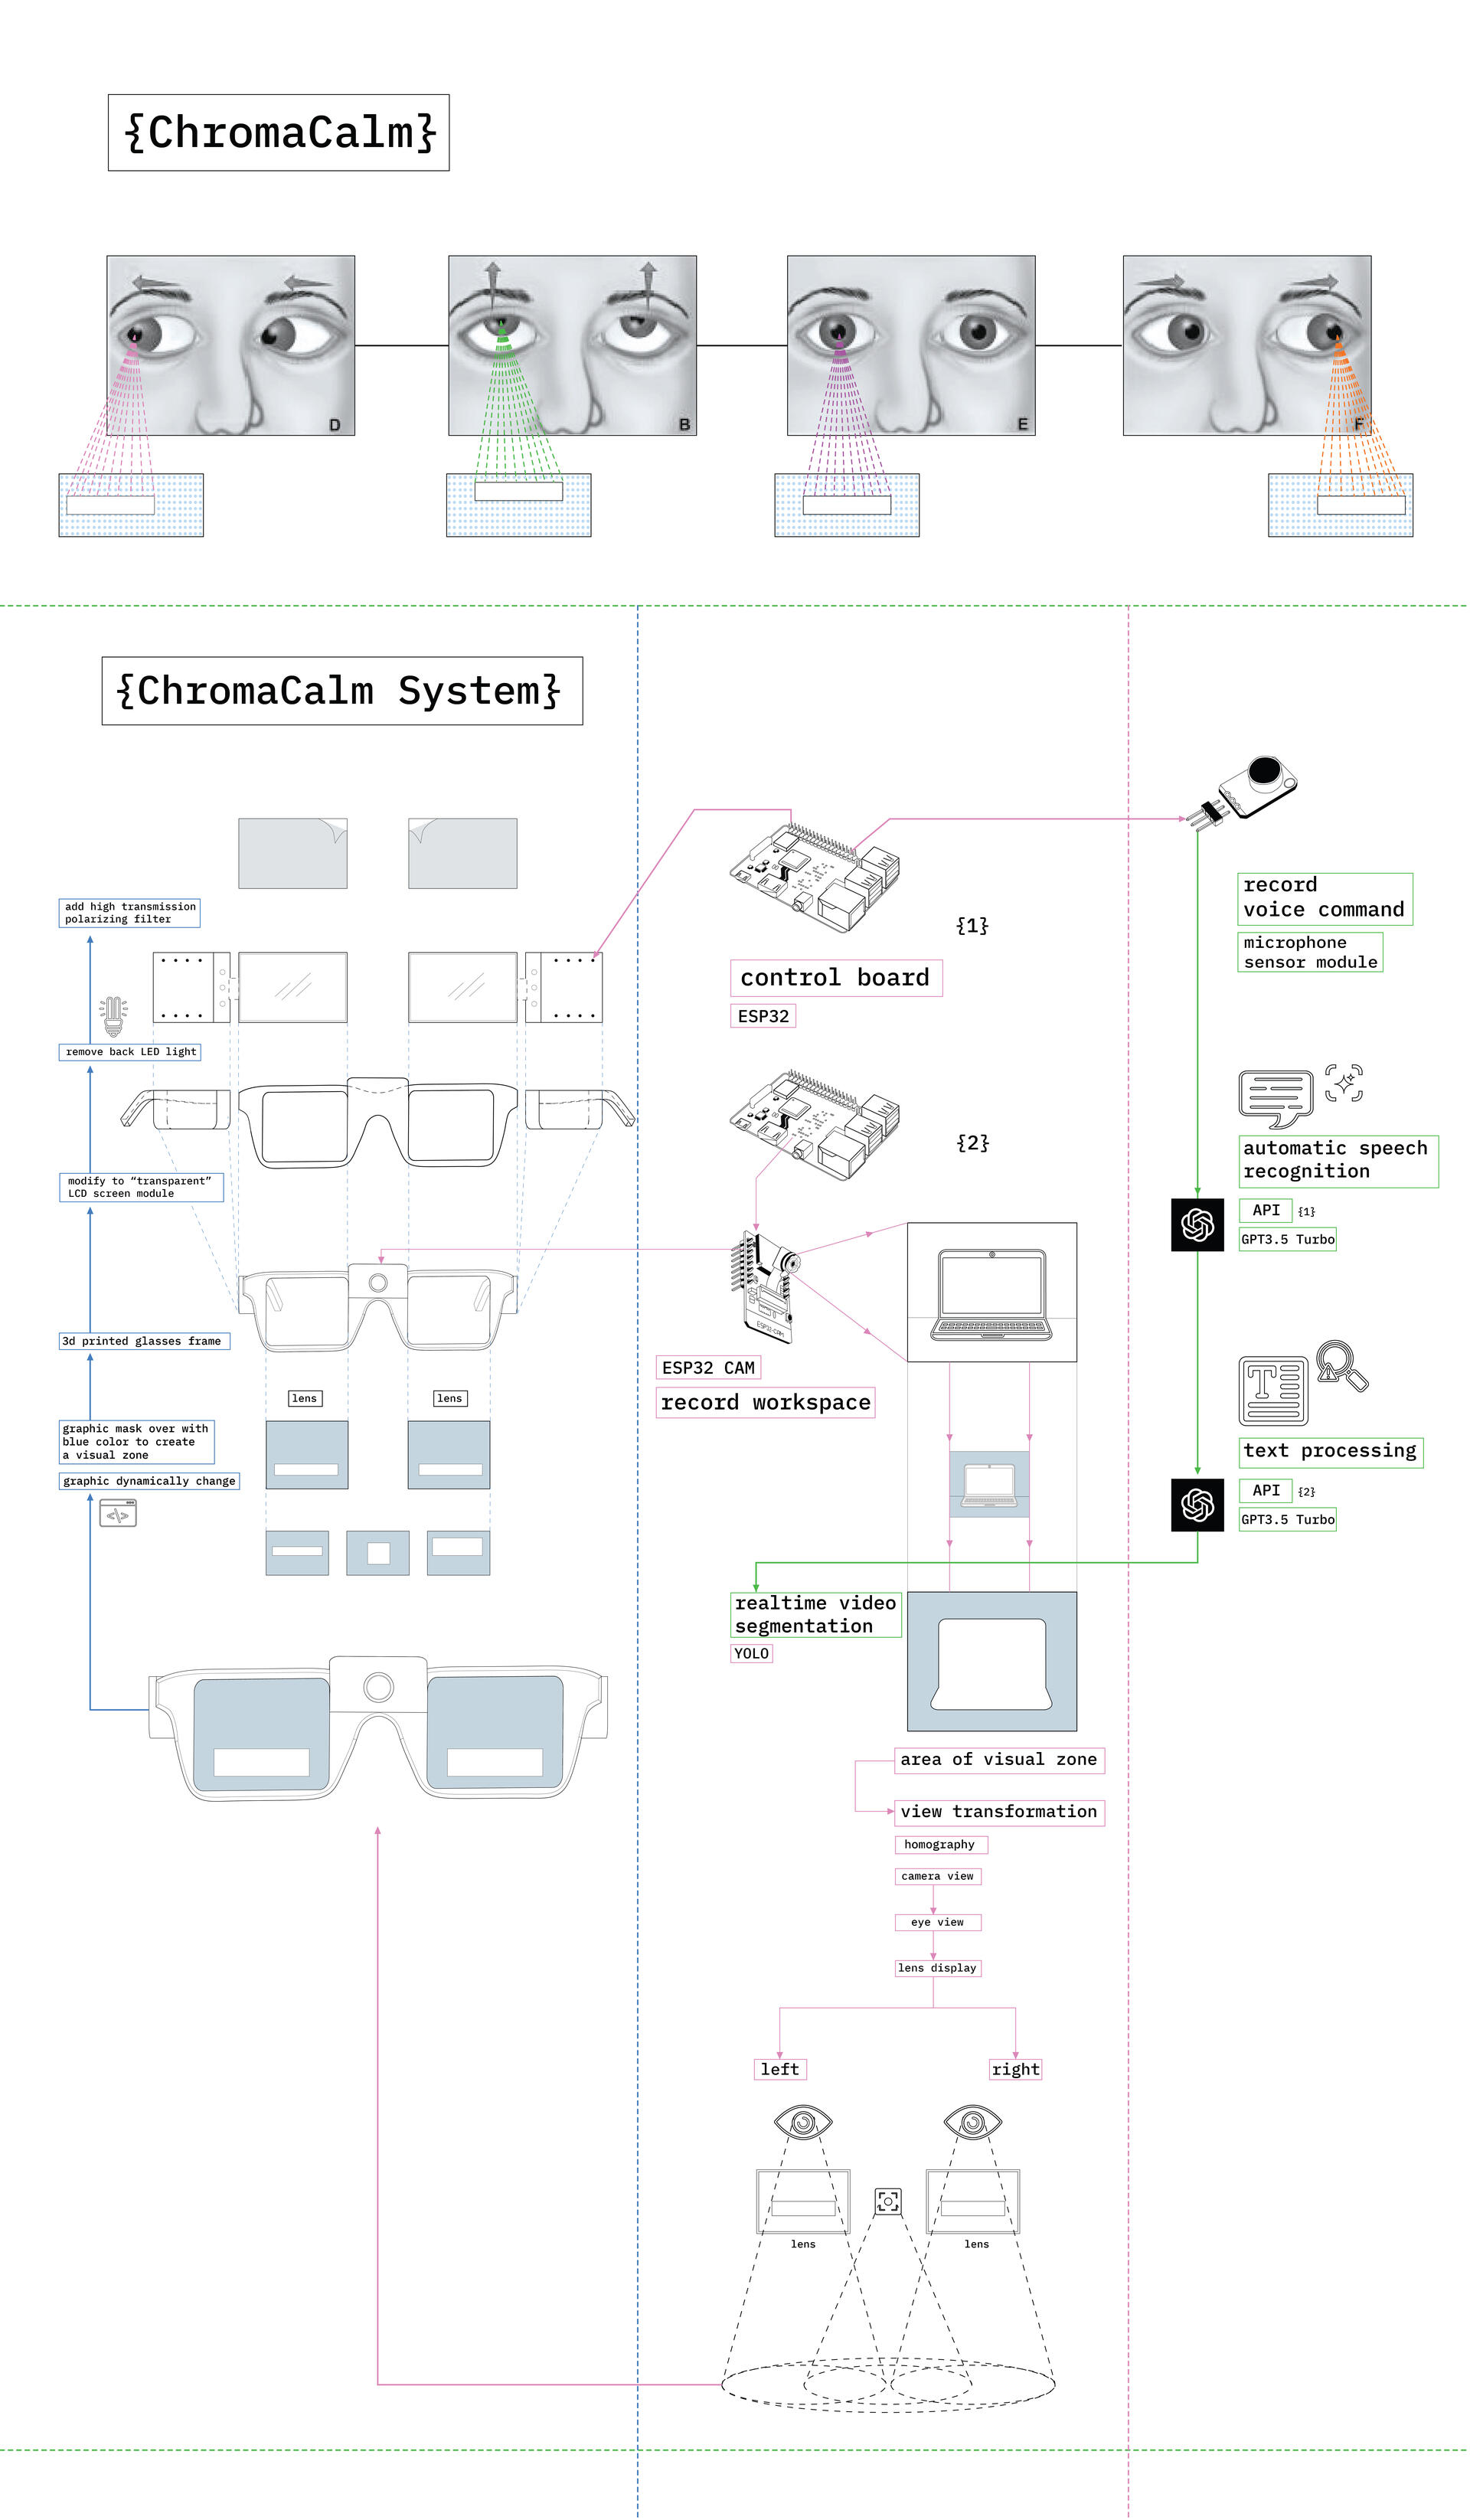 Diagram of the ChromaCalm AR glasses system with labels indicating the control board, ESP32 CAM, software interaction, and real-time lens adjustment for focus enhancement.